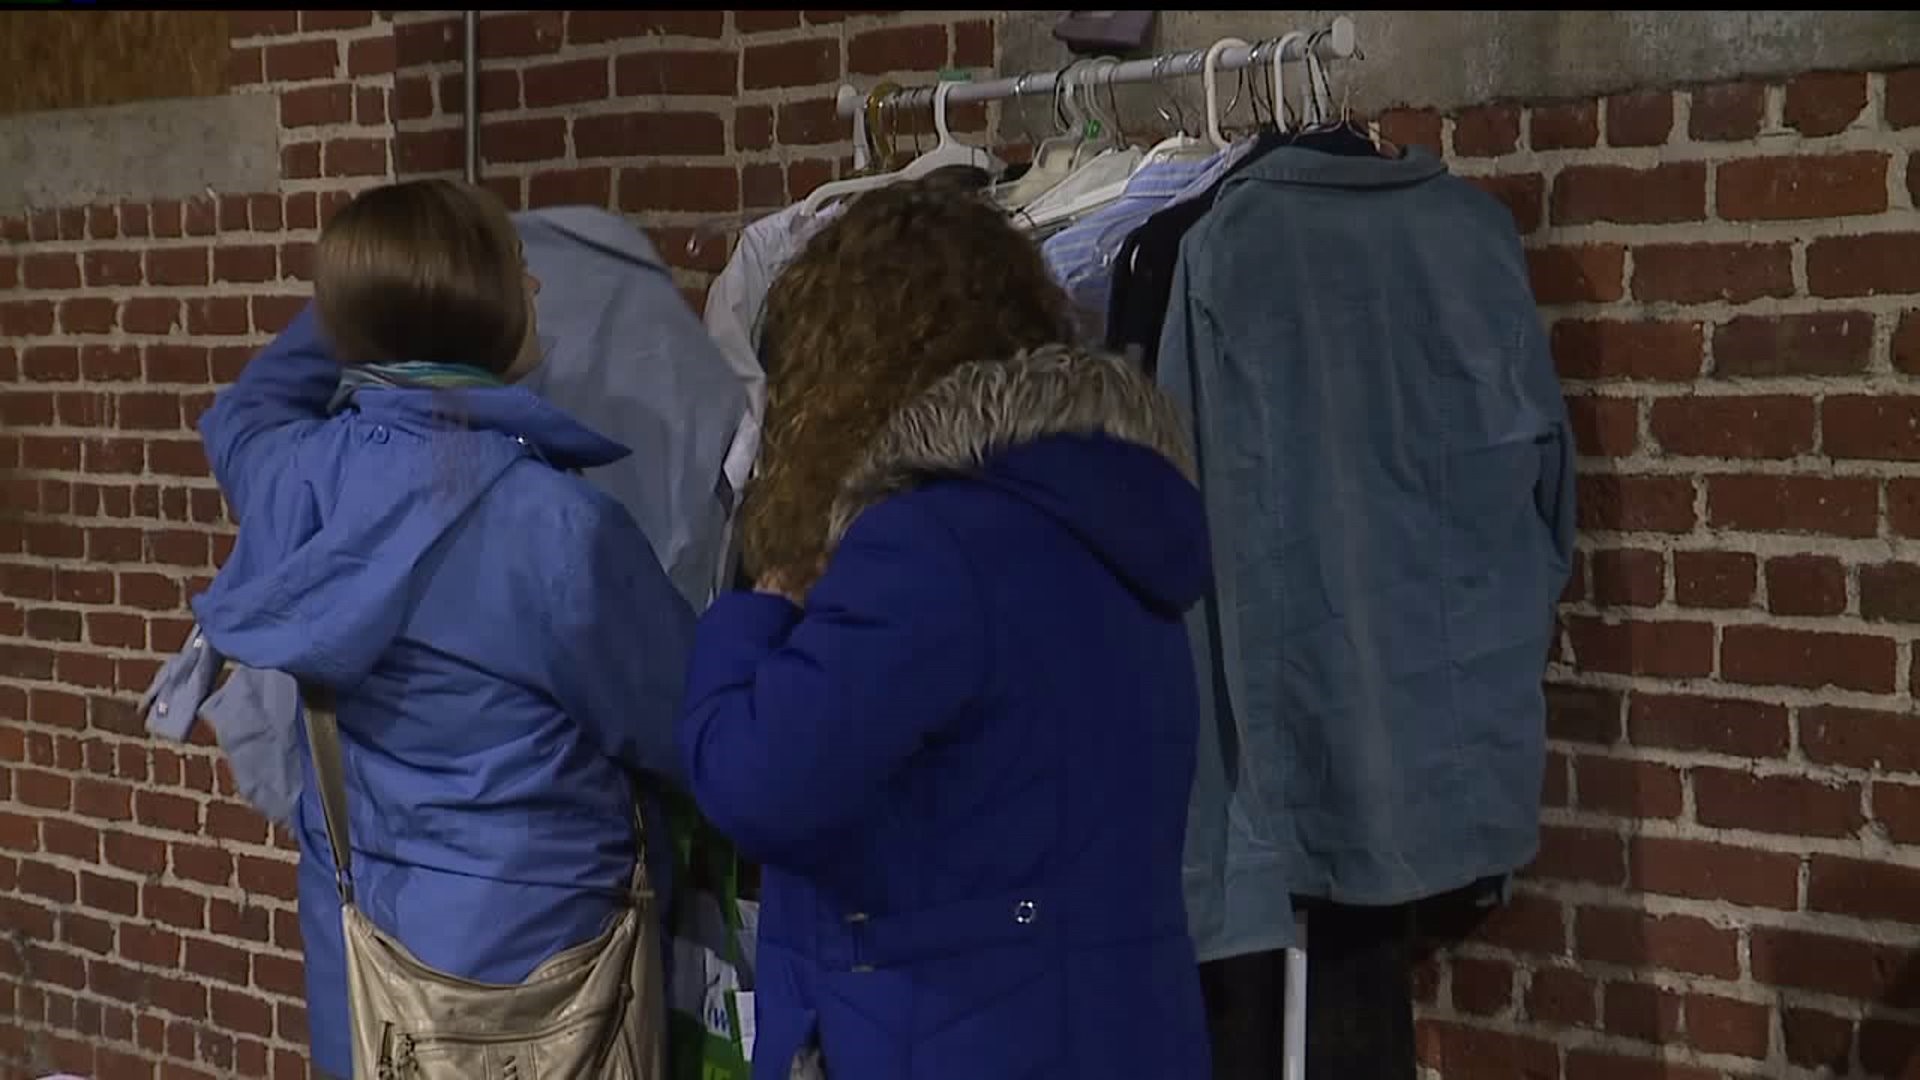 A "pop-up shop" in York offers free necessities to families in need